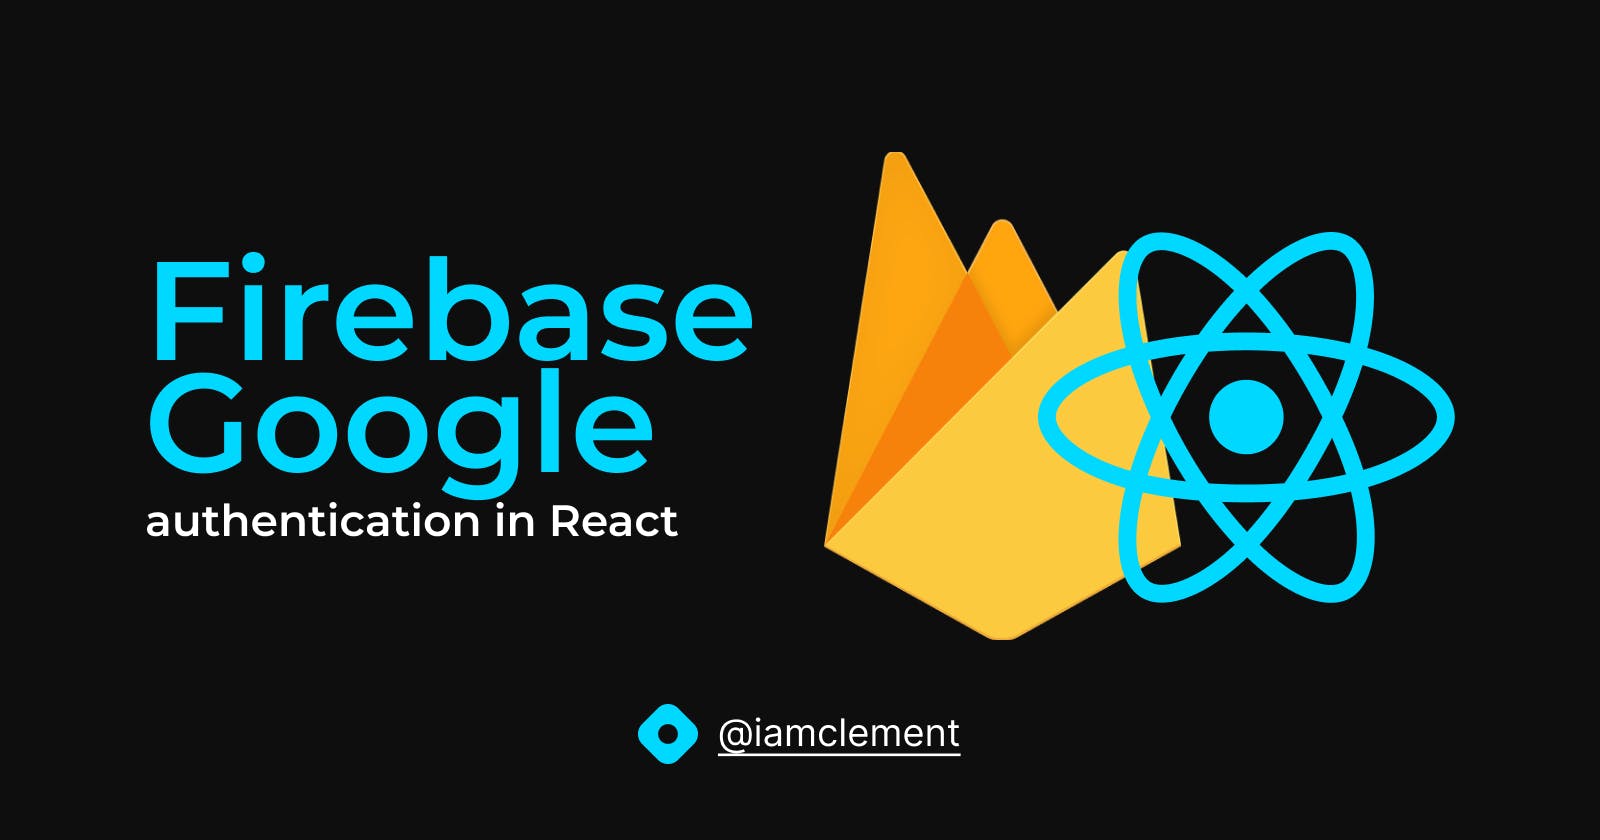 Firebase Google authentication in React